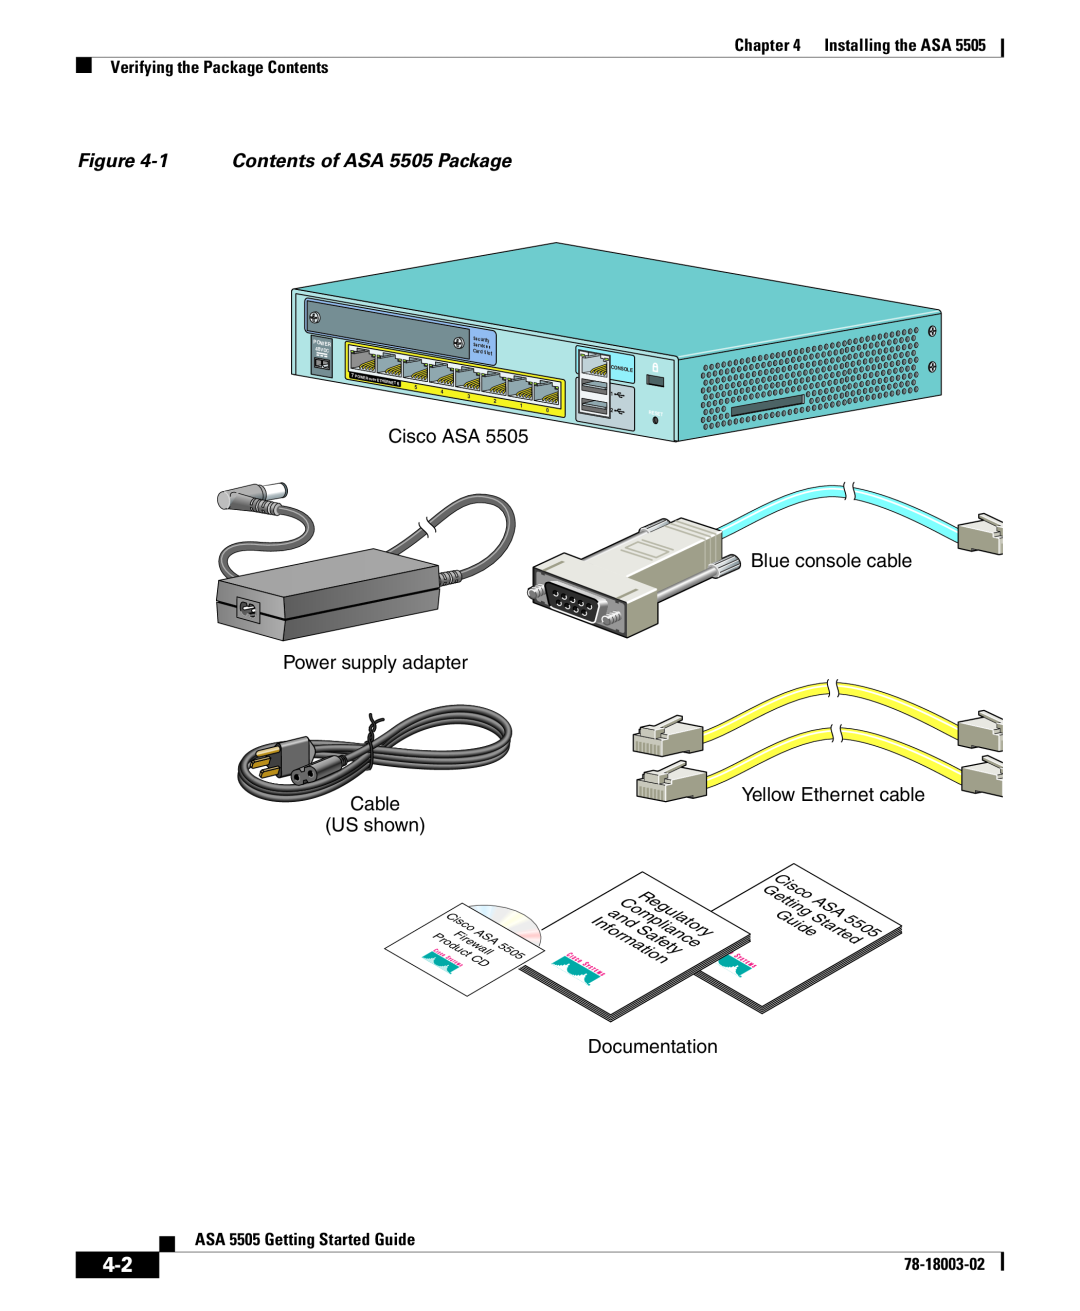 Cisco Systems 1 Contents of ASA 5505 Package, Cisco ASA, Power supply adapter Cable US shown, Documentation, Regulatory 